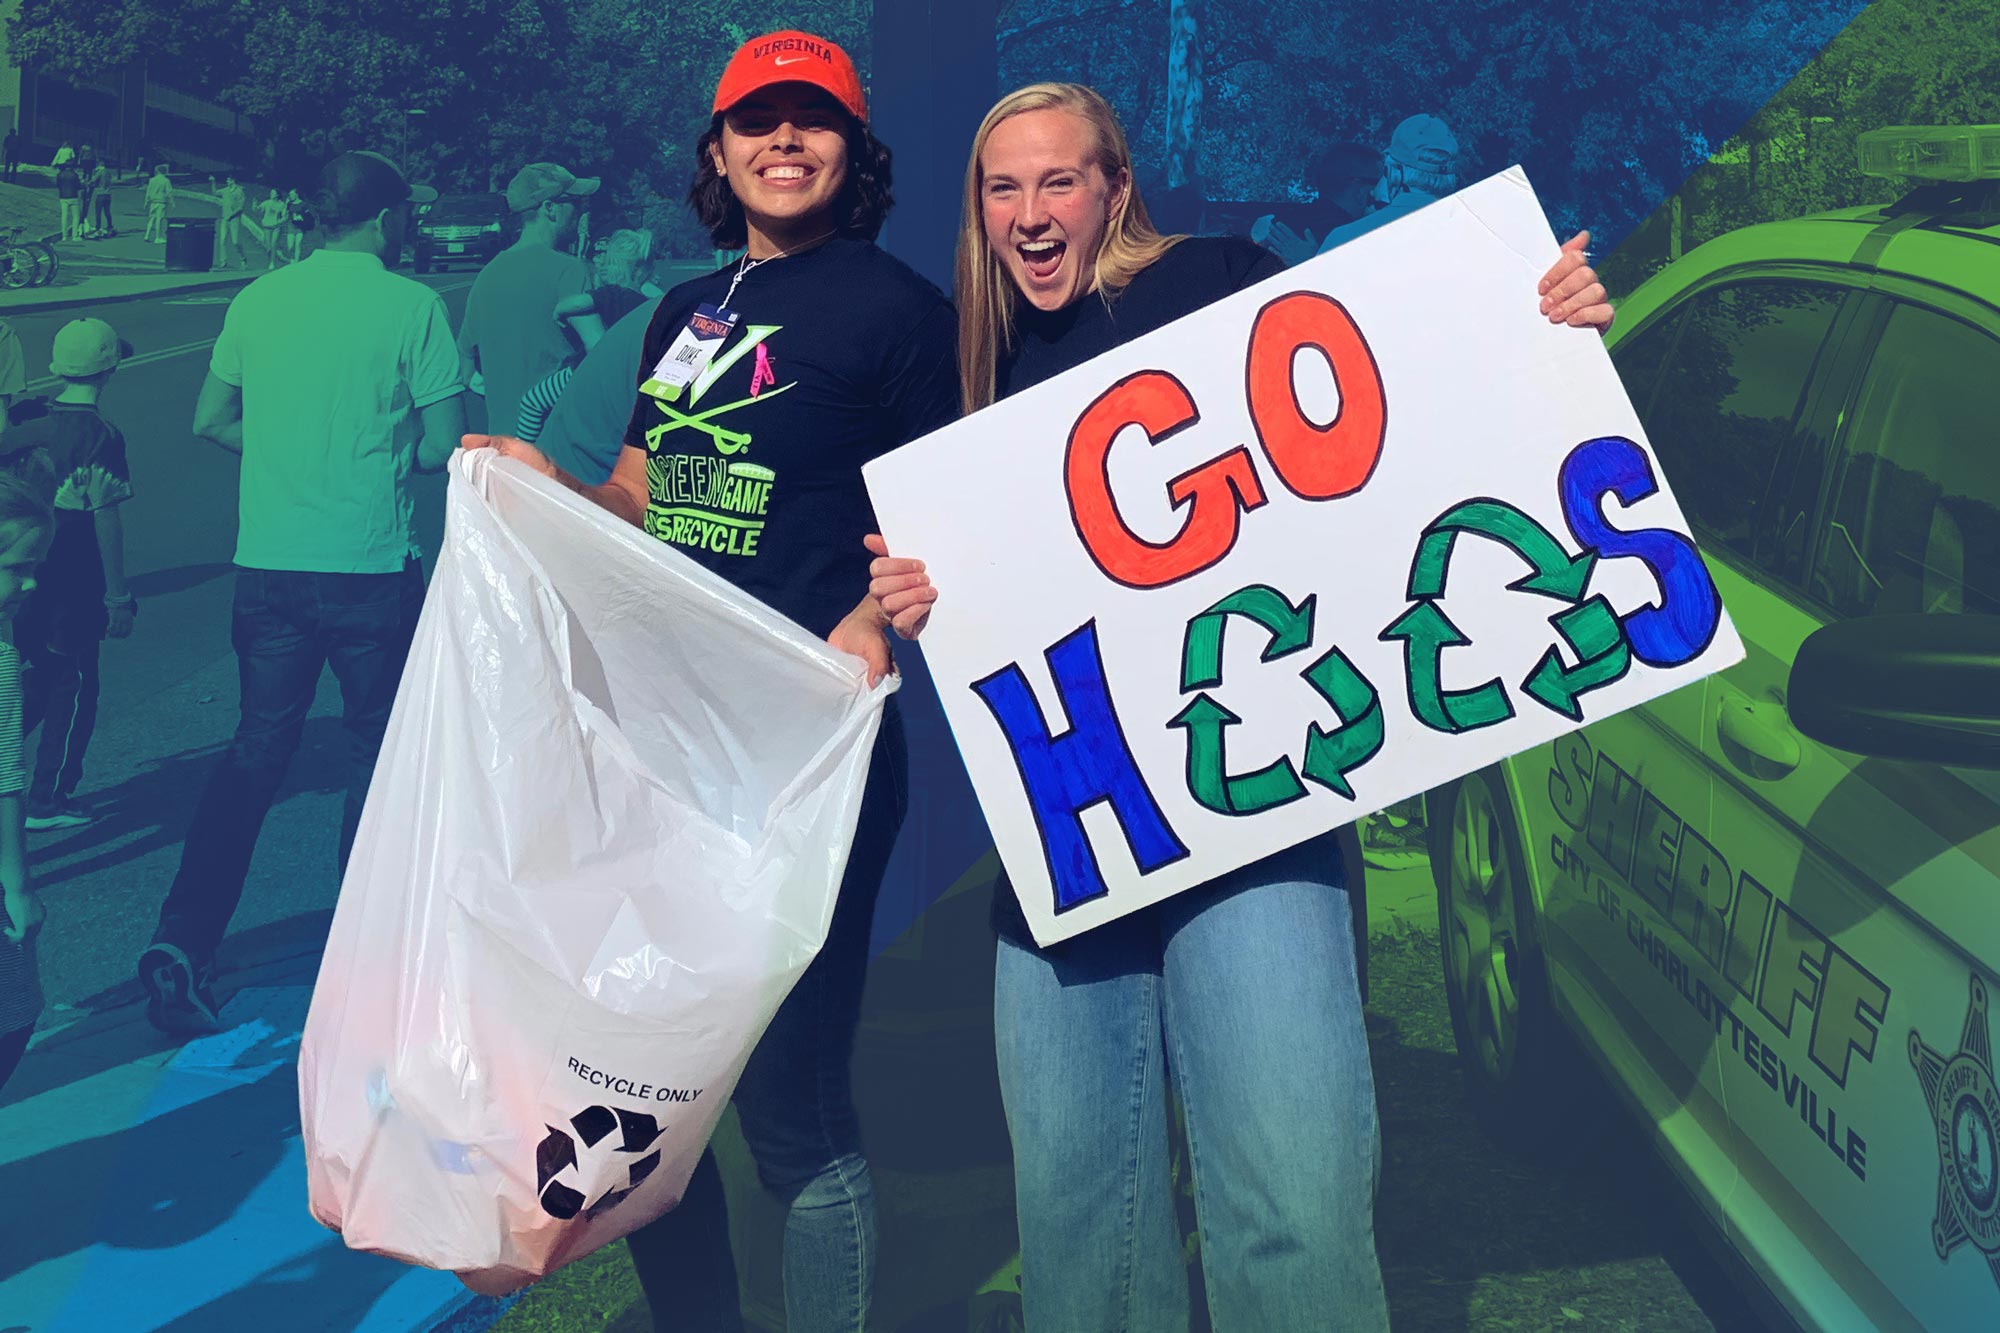 A UVA student holds a plastic recycling bag next to another student holding a sign that reads Go Hoos. The O's in Hoos are recycling symbols.